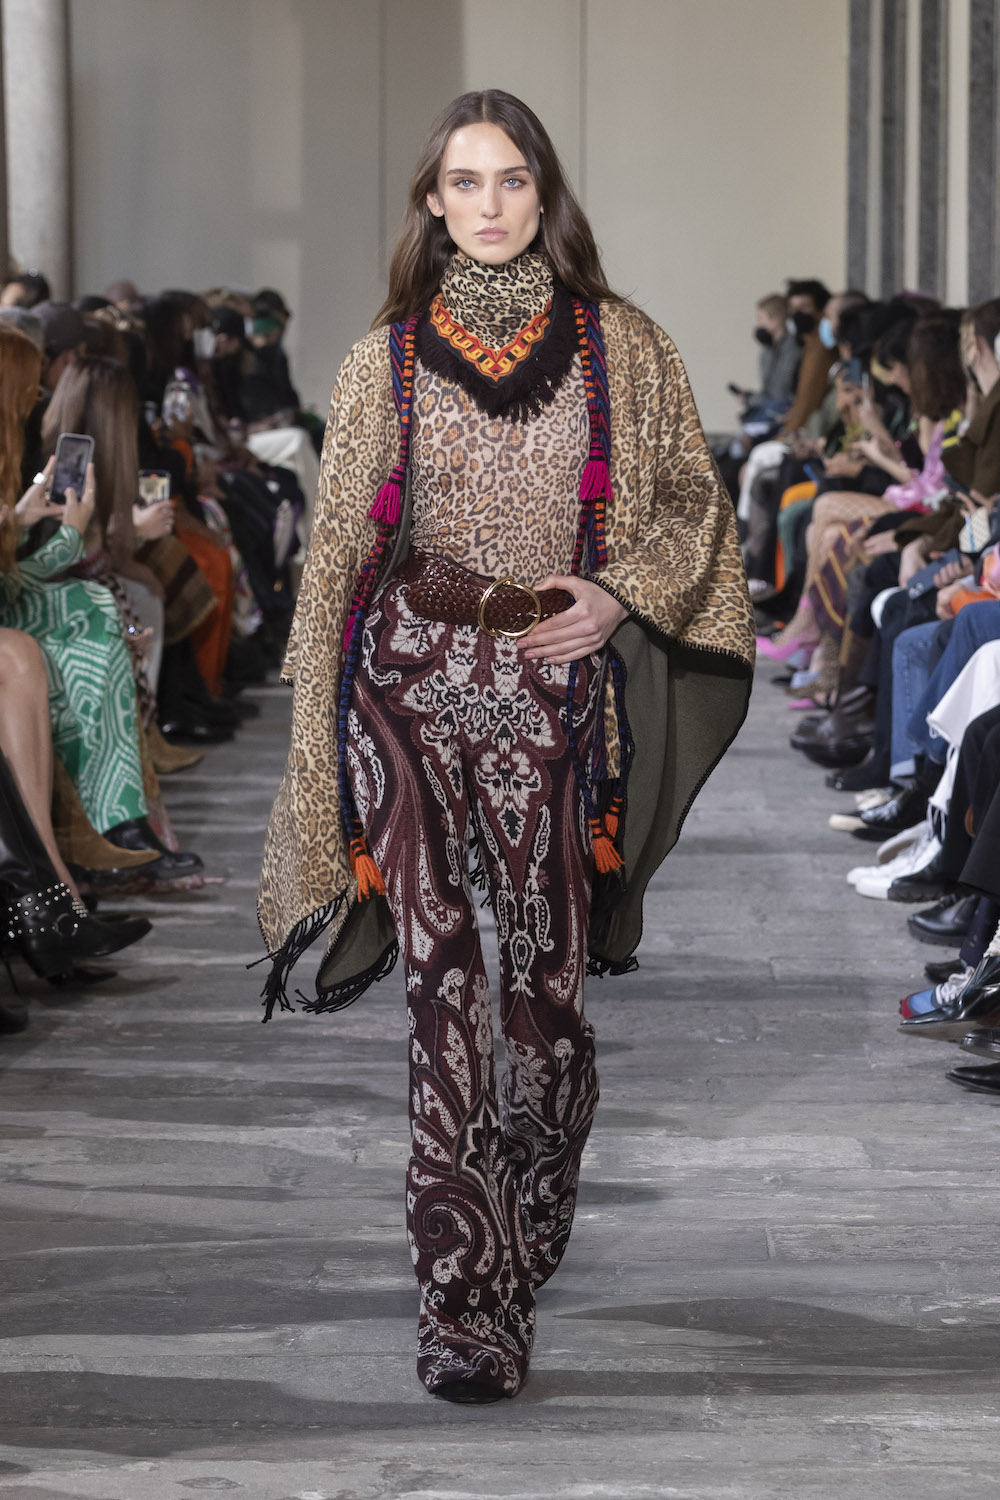  A paisley look from Etro's Autumn/Winter 2022 show.